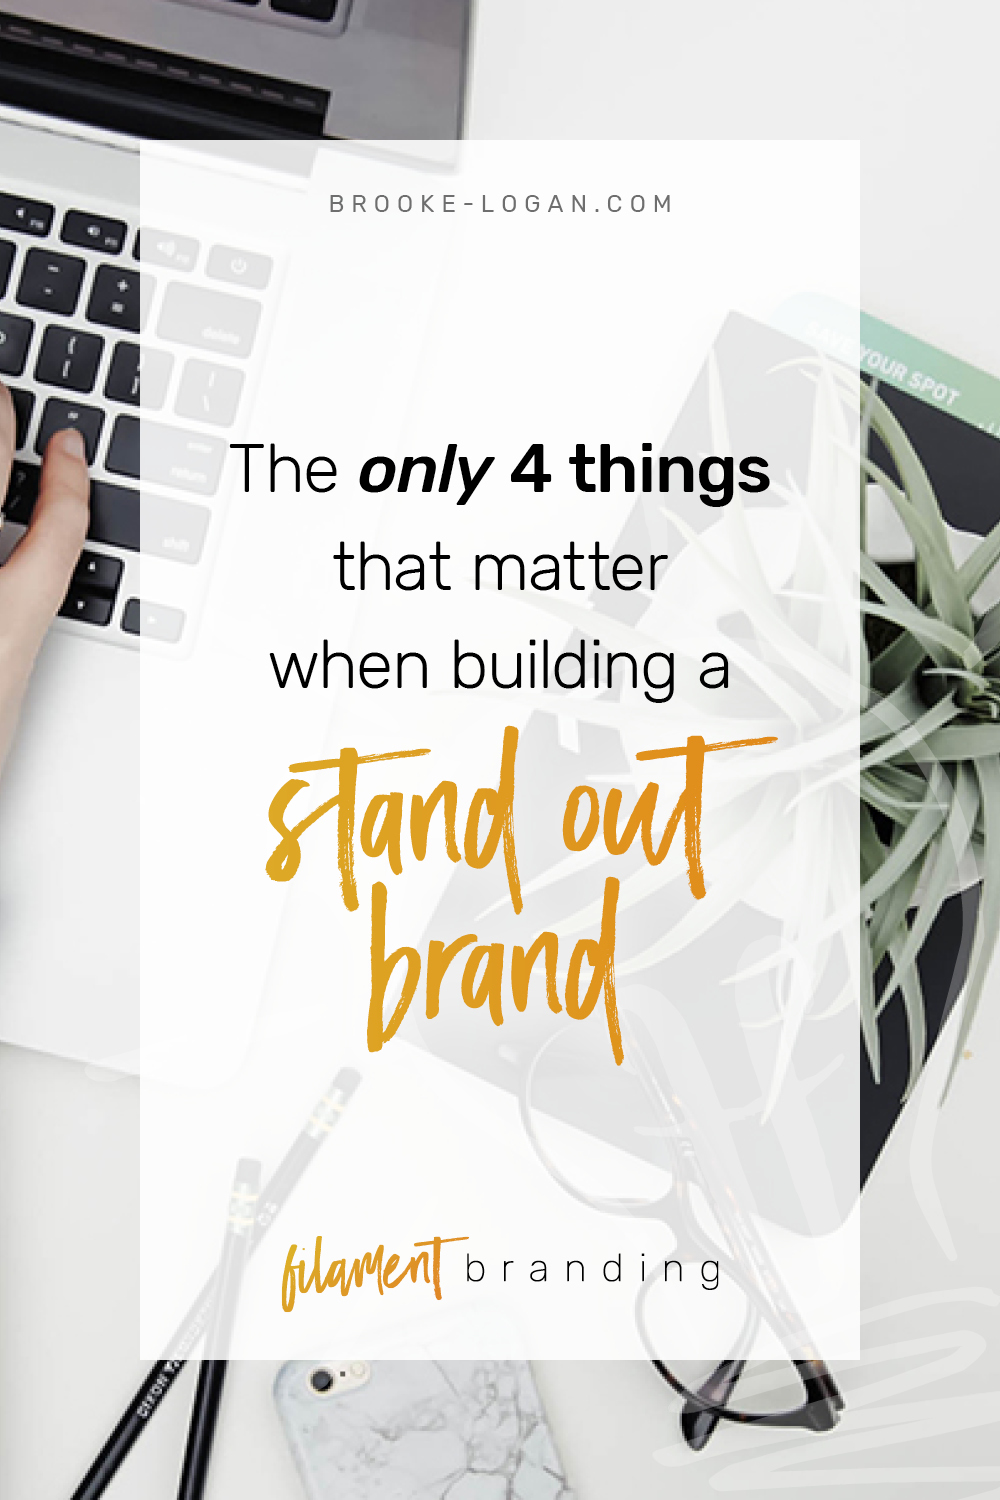 Ep 1: The only 4 things that matter when building a stand out brand